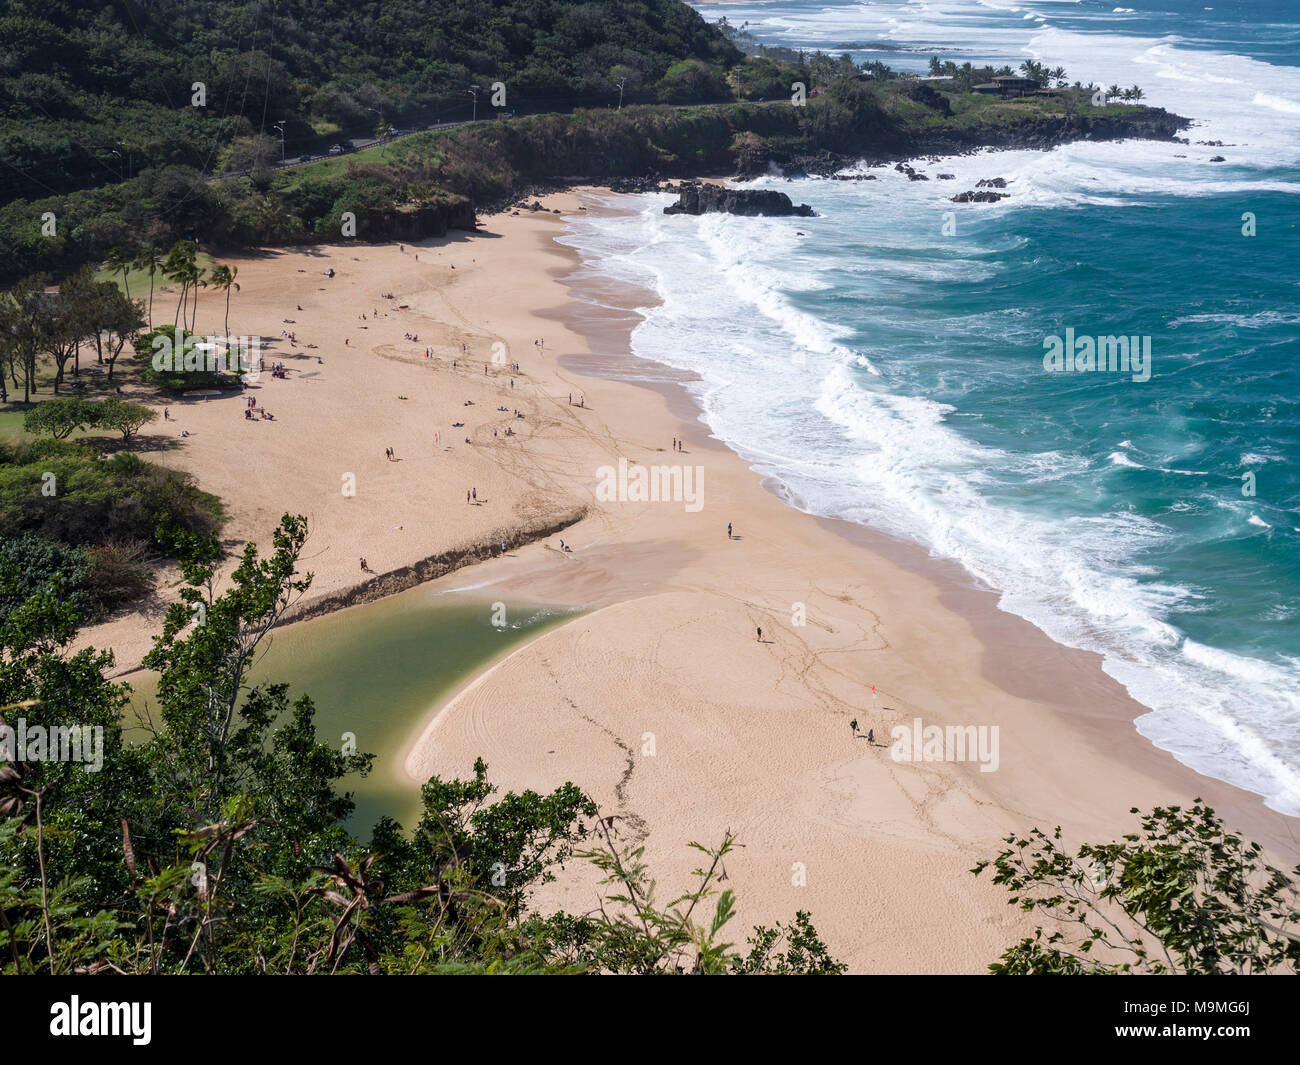 Waimea Bay Beach Park from high above: The fine sand of Waimea Bay beach populated by many beach goers watching the wavews. None swimming due to the heavy swell in the blue ocean waters. Stock Photo